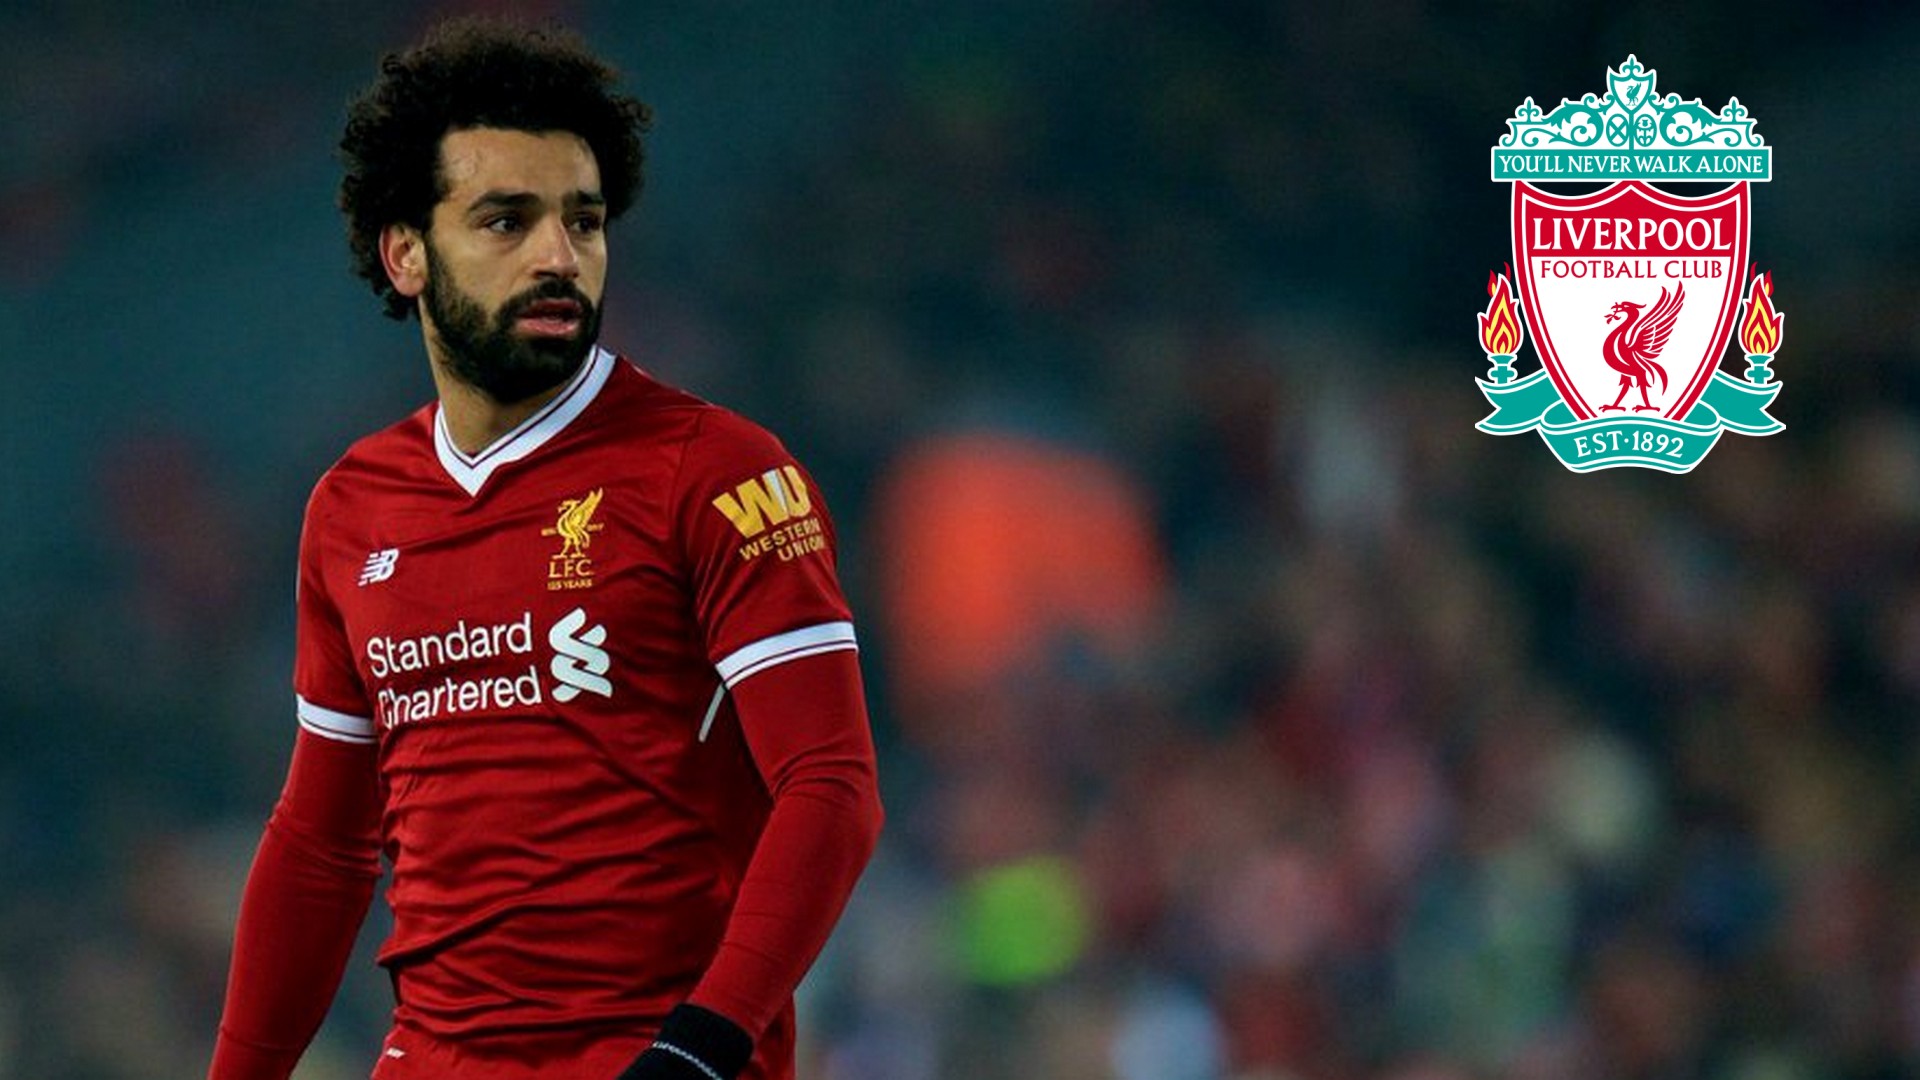 Best Liverpool Mohamed Salah Wallpaper with image resolution 1920x1080 pixel. You can use this wallpaper as background for your desktop Computer Screensavers, Android or iPhone smartphones